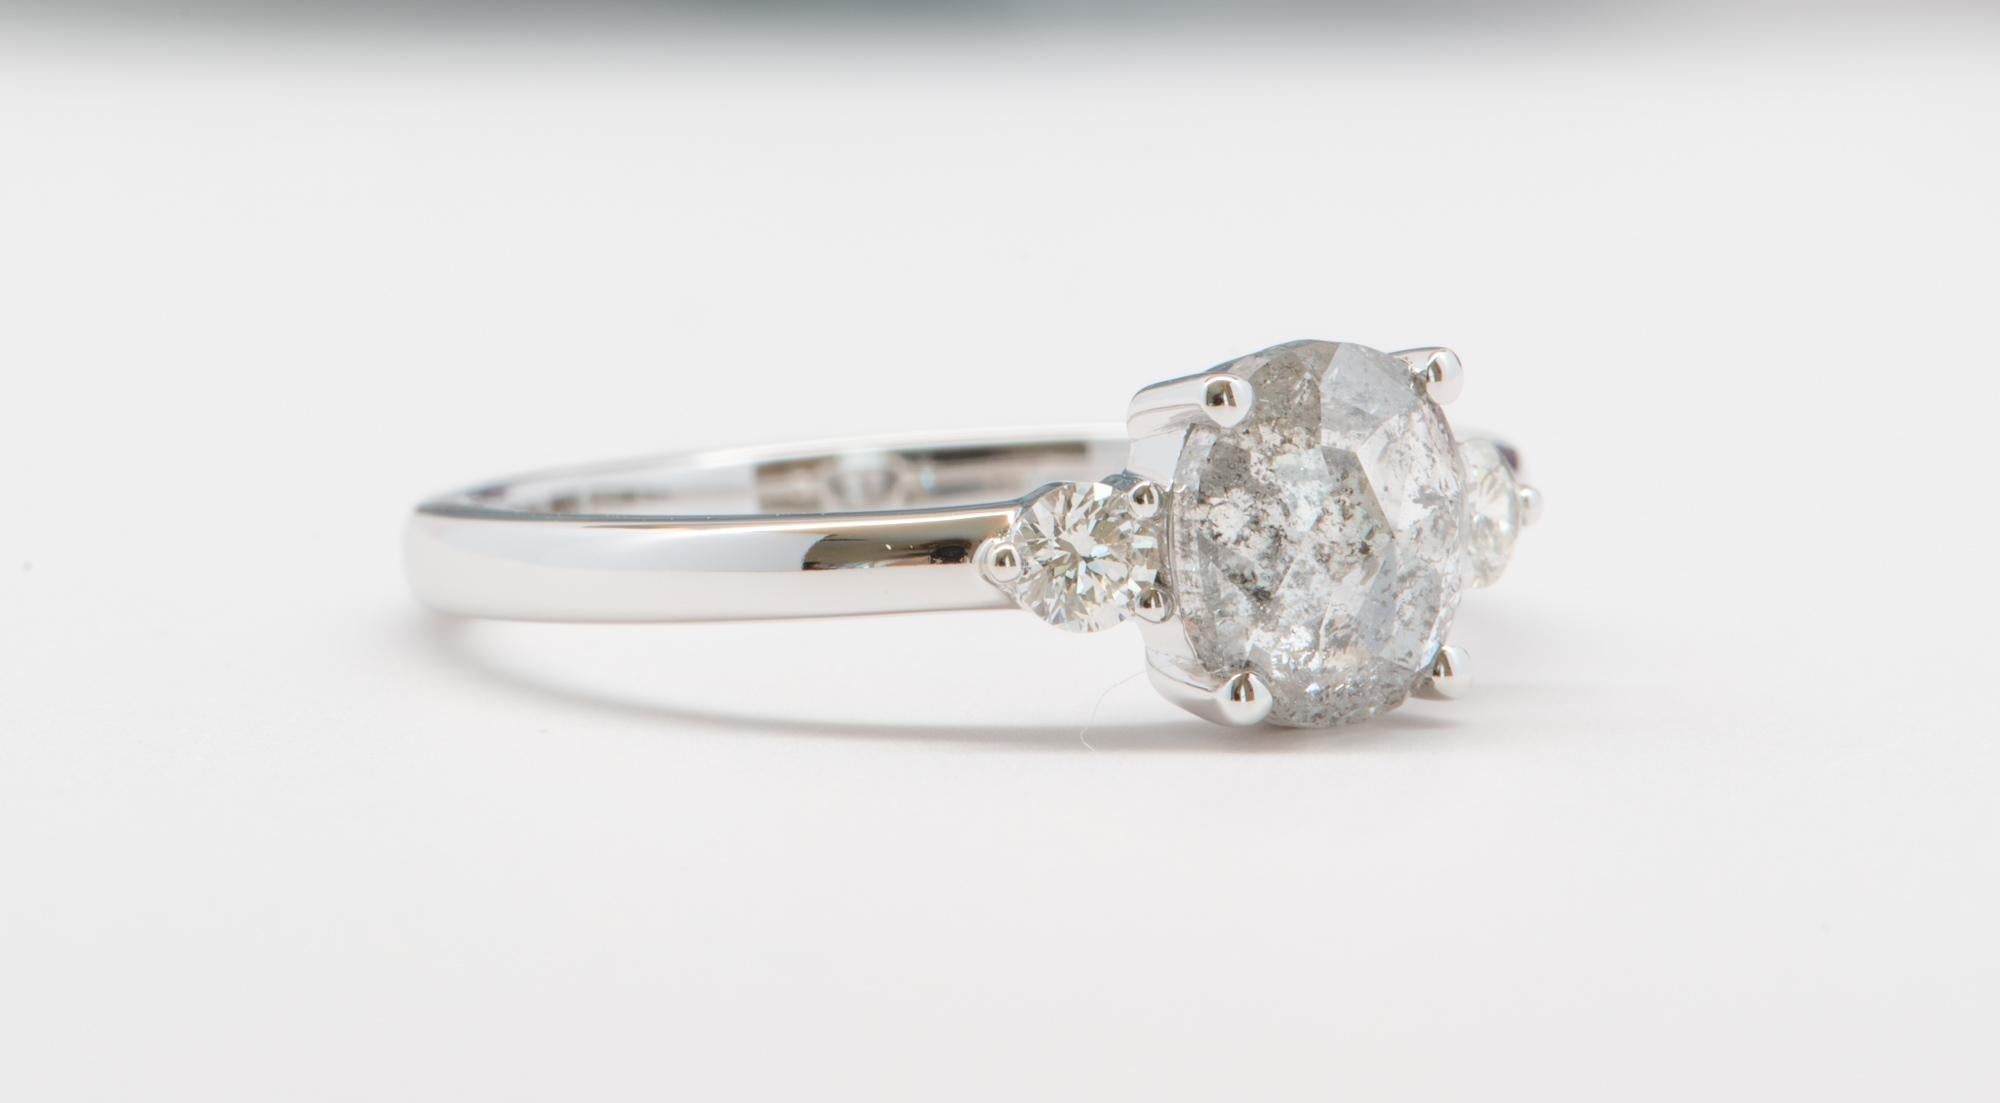 ♥  A solid 14k white gold ring featuring an oval-shaped salt and pepper diamond in the center, flanked with two colorless diamonds on each side to complement the center stone
♥  The overall setting measures 11.8mm in width, 6.6mm in length, and sits